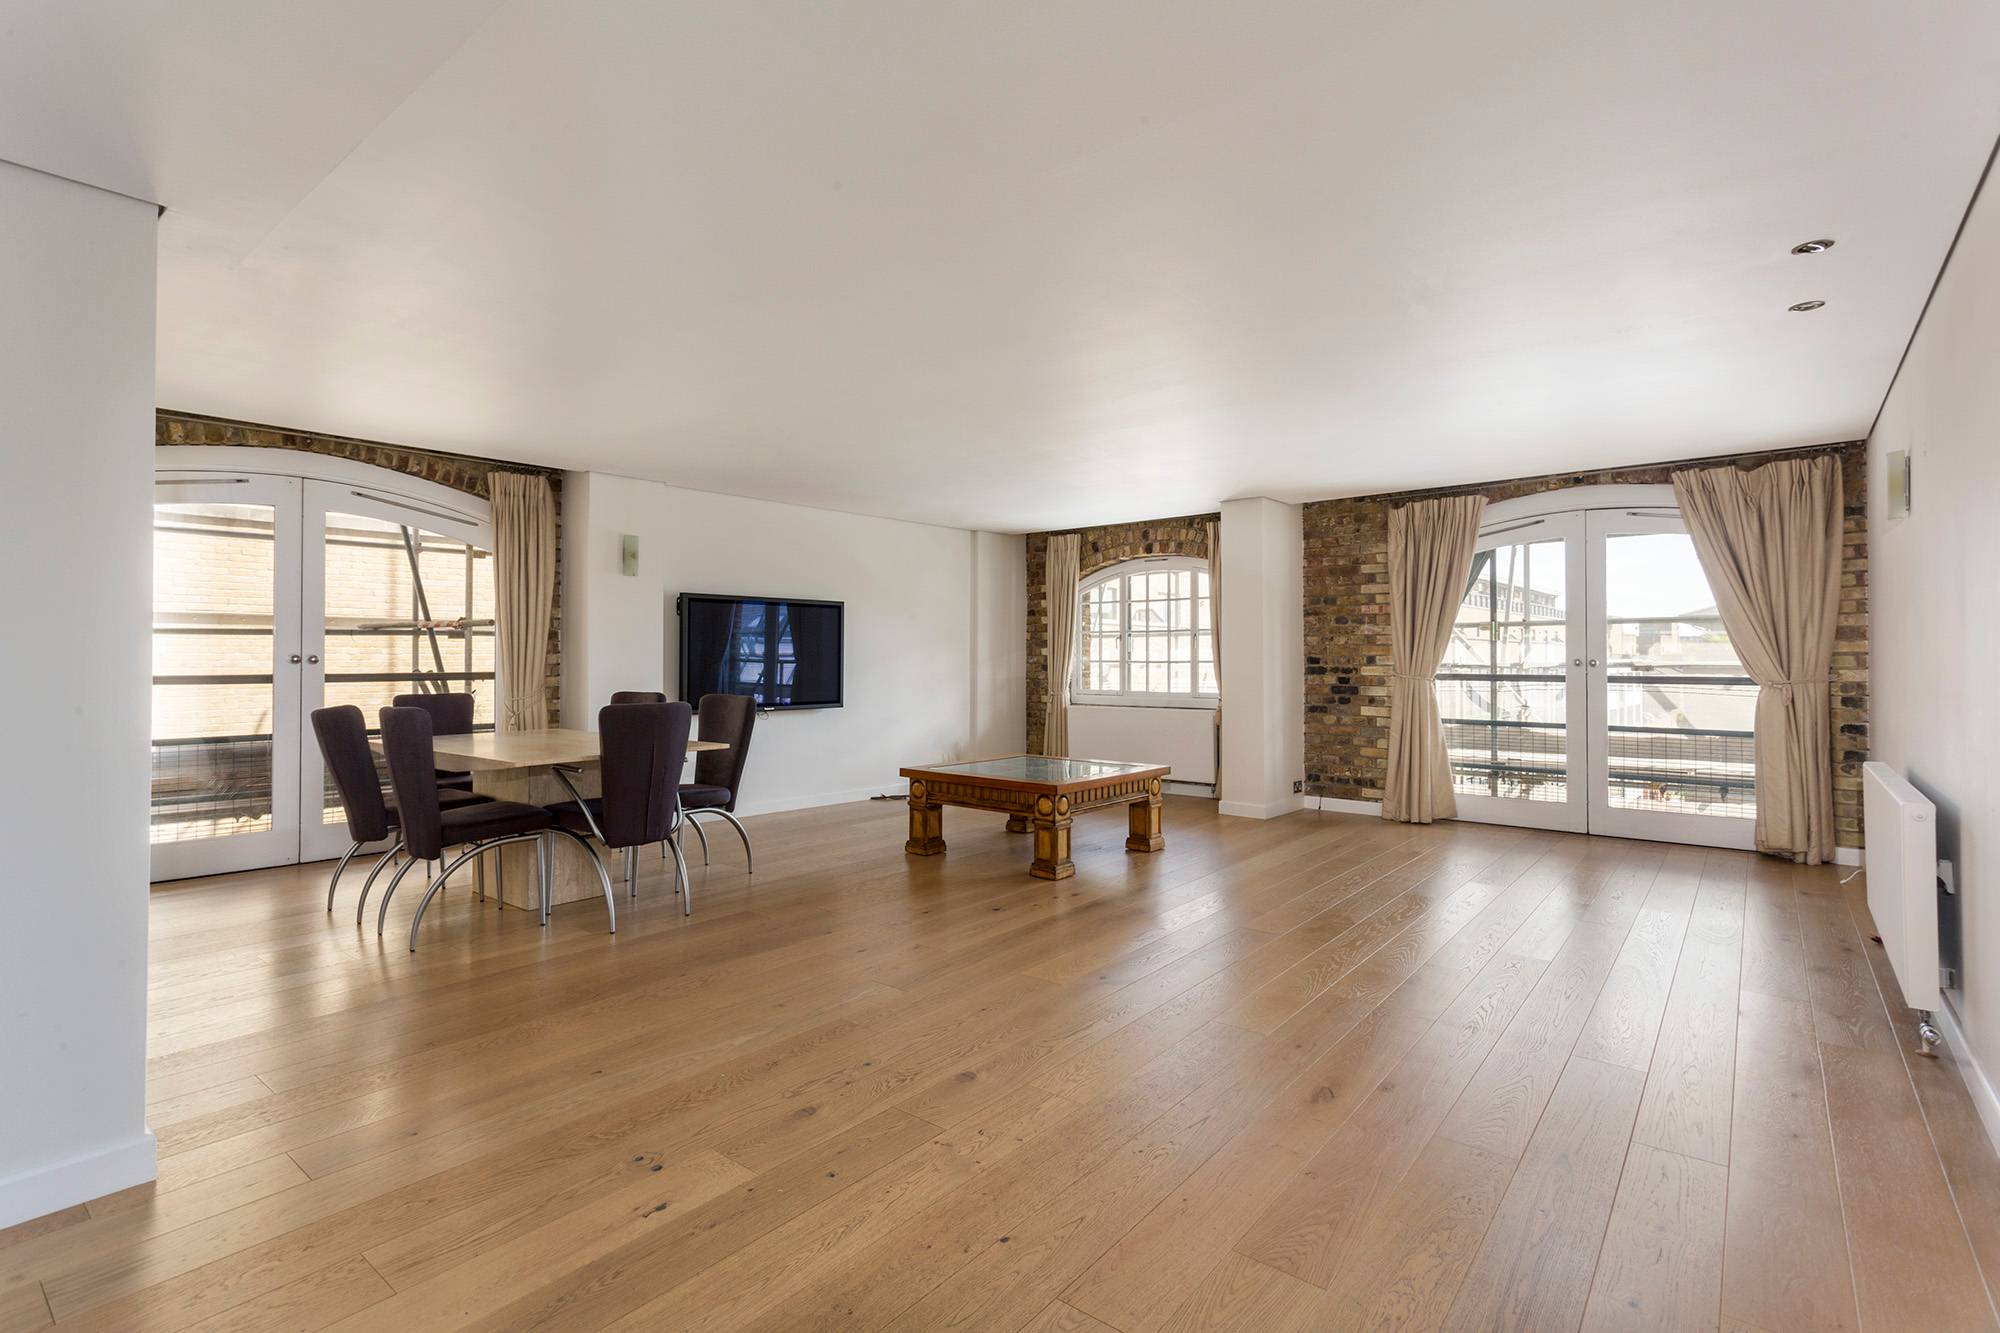 This classic two-bedroom apartment at Butlers Wharf in Shad Thames should be of interest to those looking to rent a piece of warehouse living history. The building comes with 24h porter and secured underground parking.